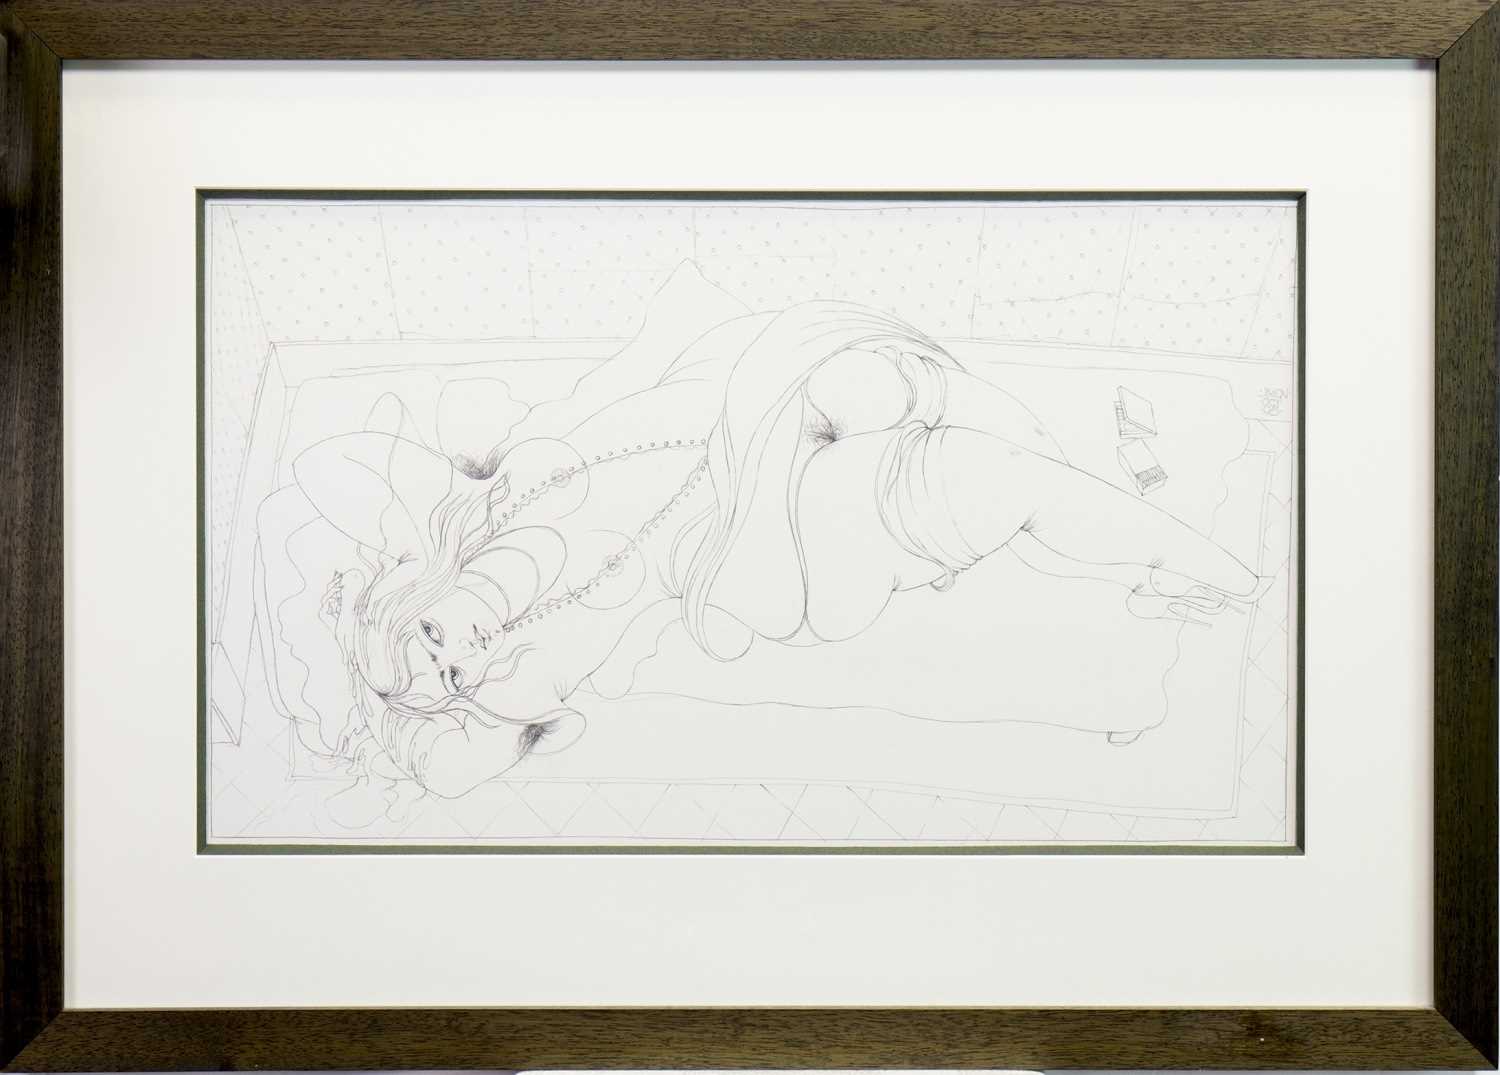 Lot 537 - MR LAUTREC IS COMING, A PENCIL SKETCH BY JAMES MCNAUGHT